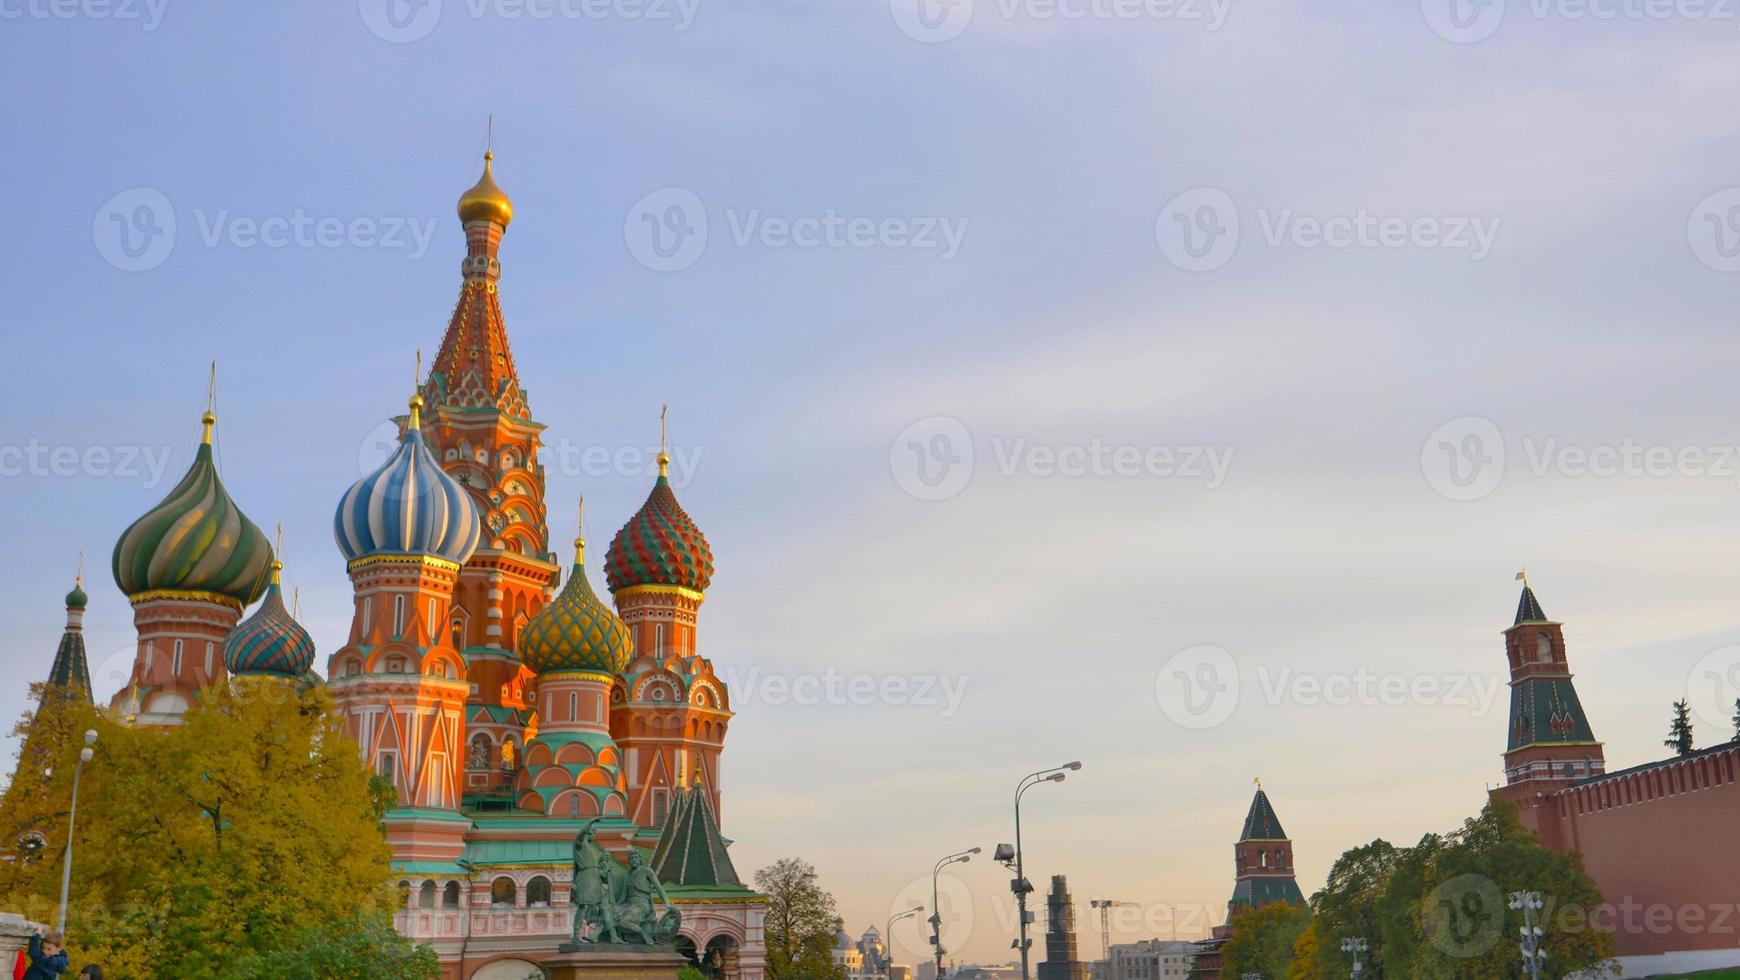 St. Basil's Cathedral in Red Square Moscow Kremlin, Russia photo